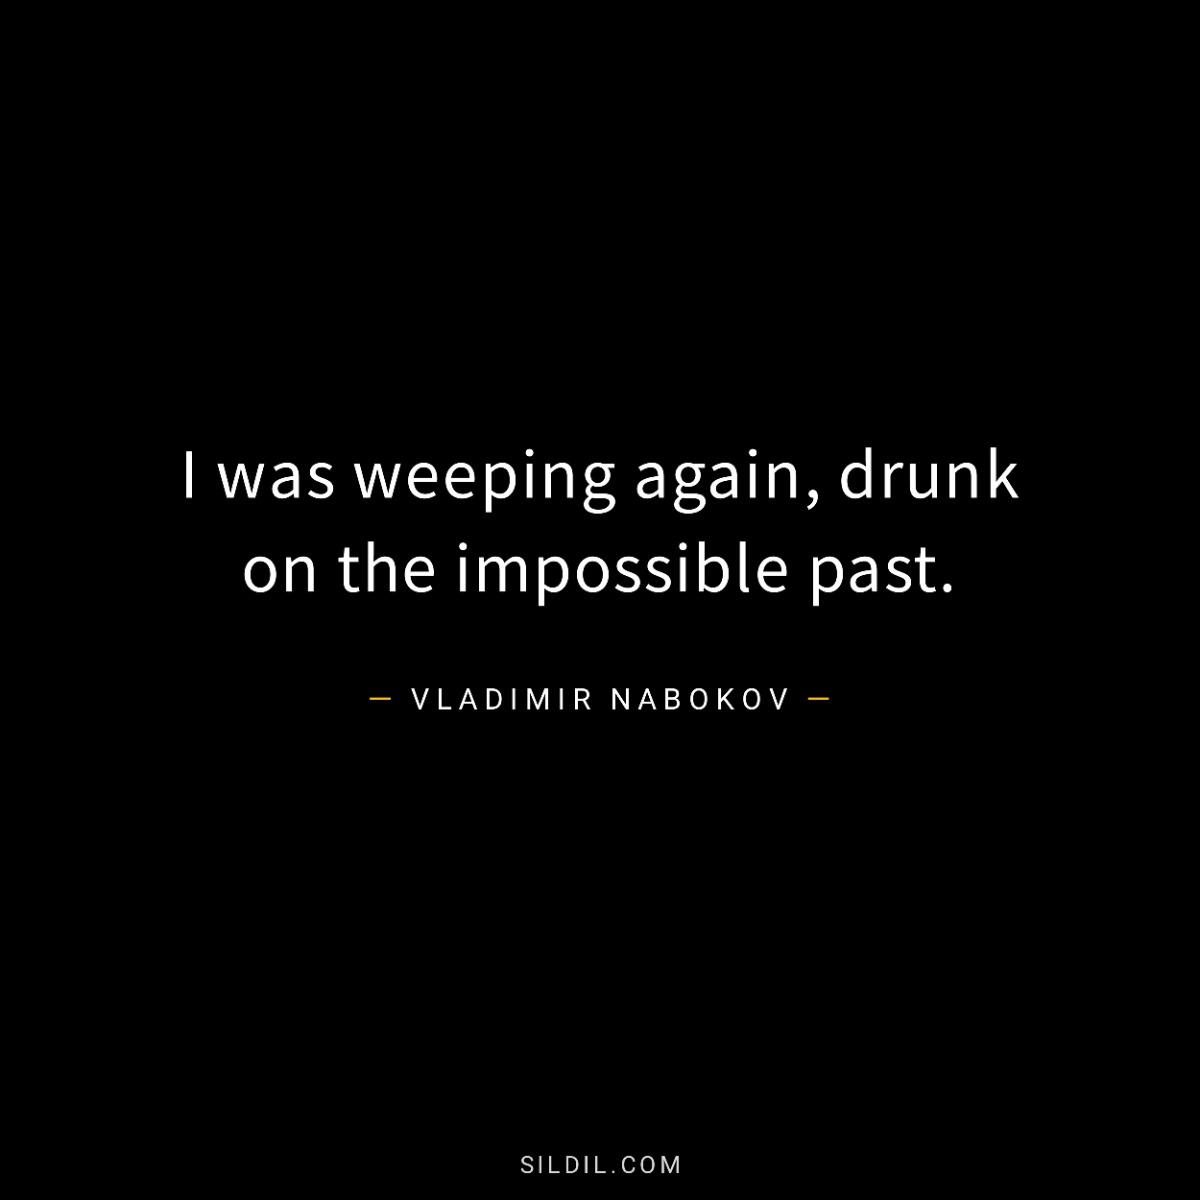 I was weeping again, drunk on the impossible past.